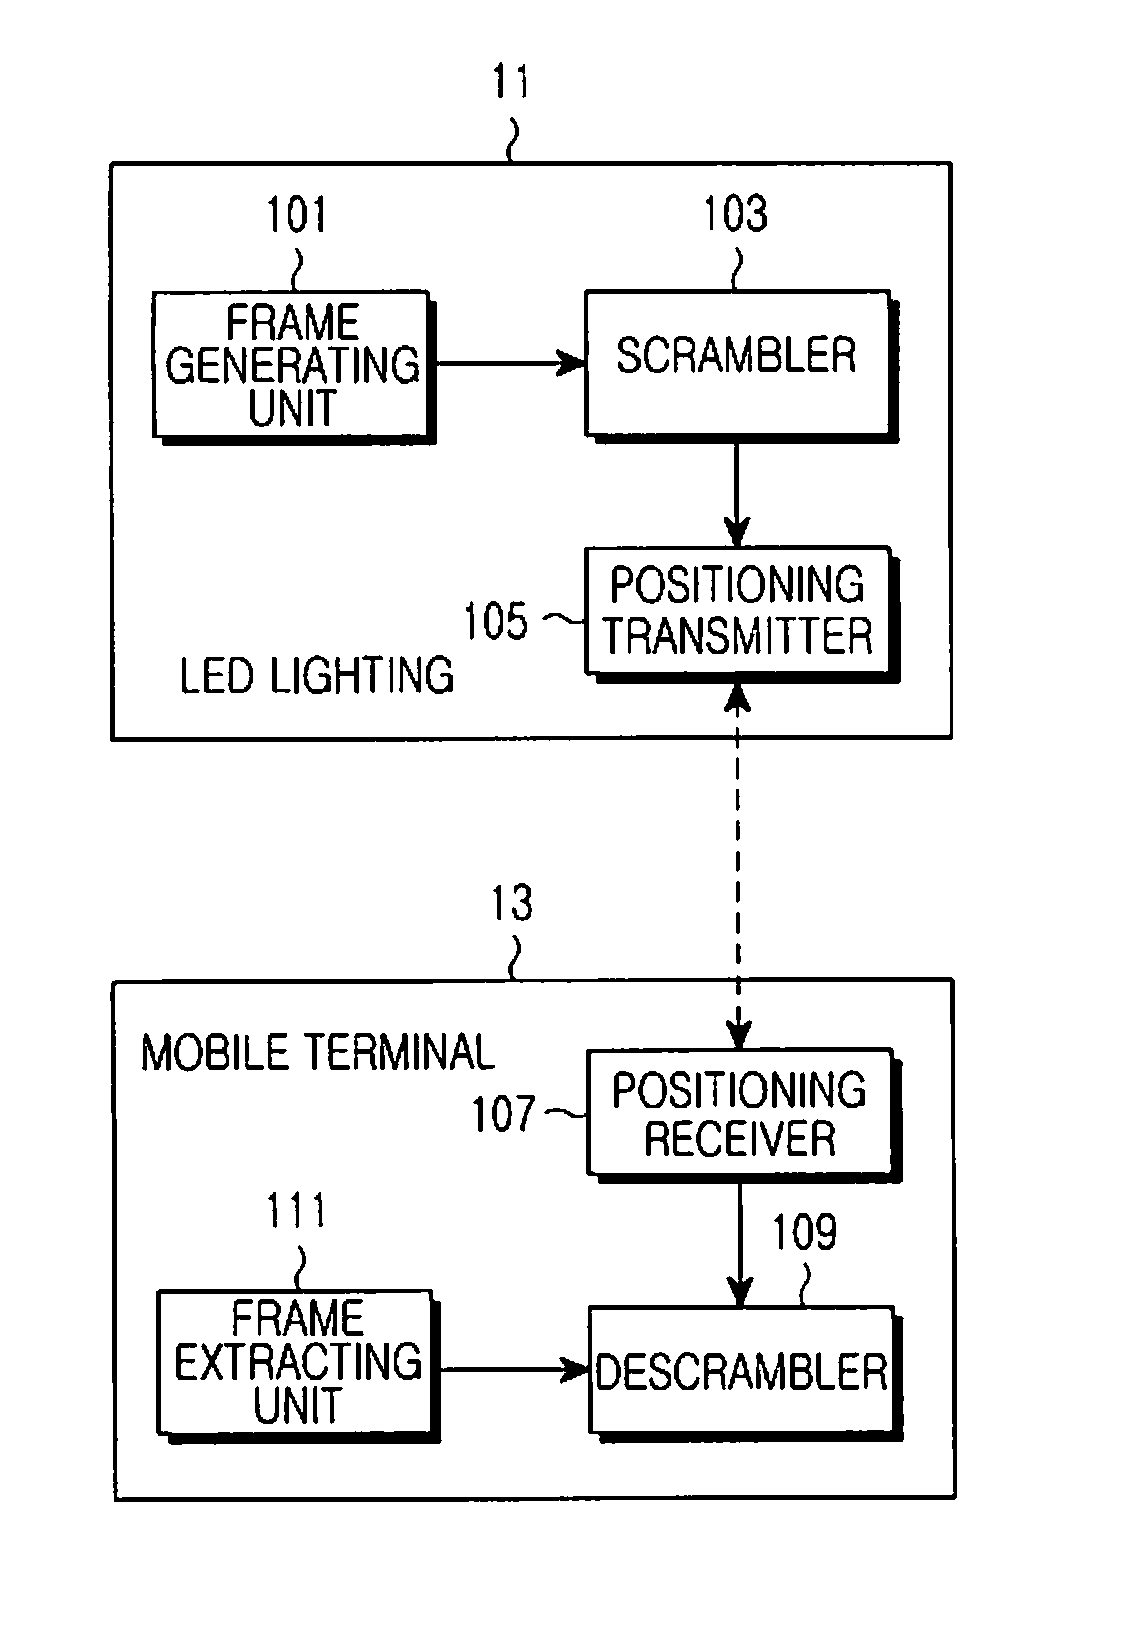 System and method for indoor positioning using LED lighting